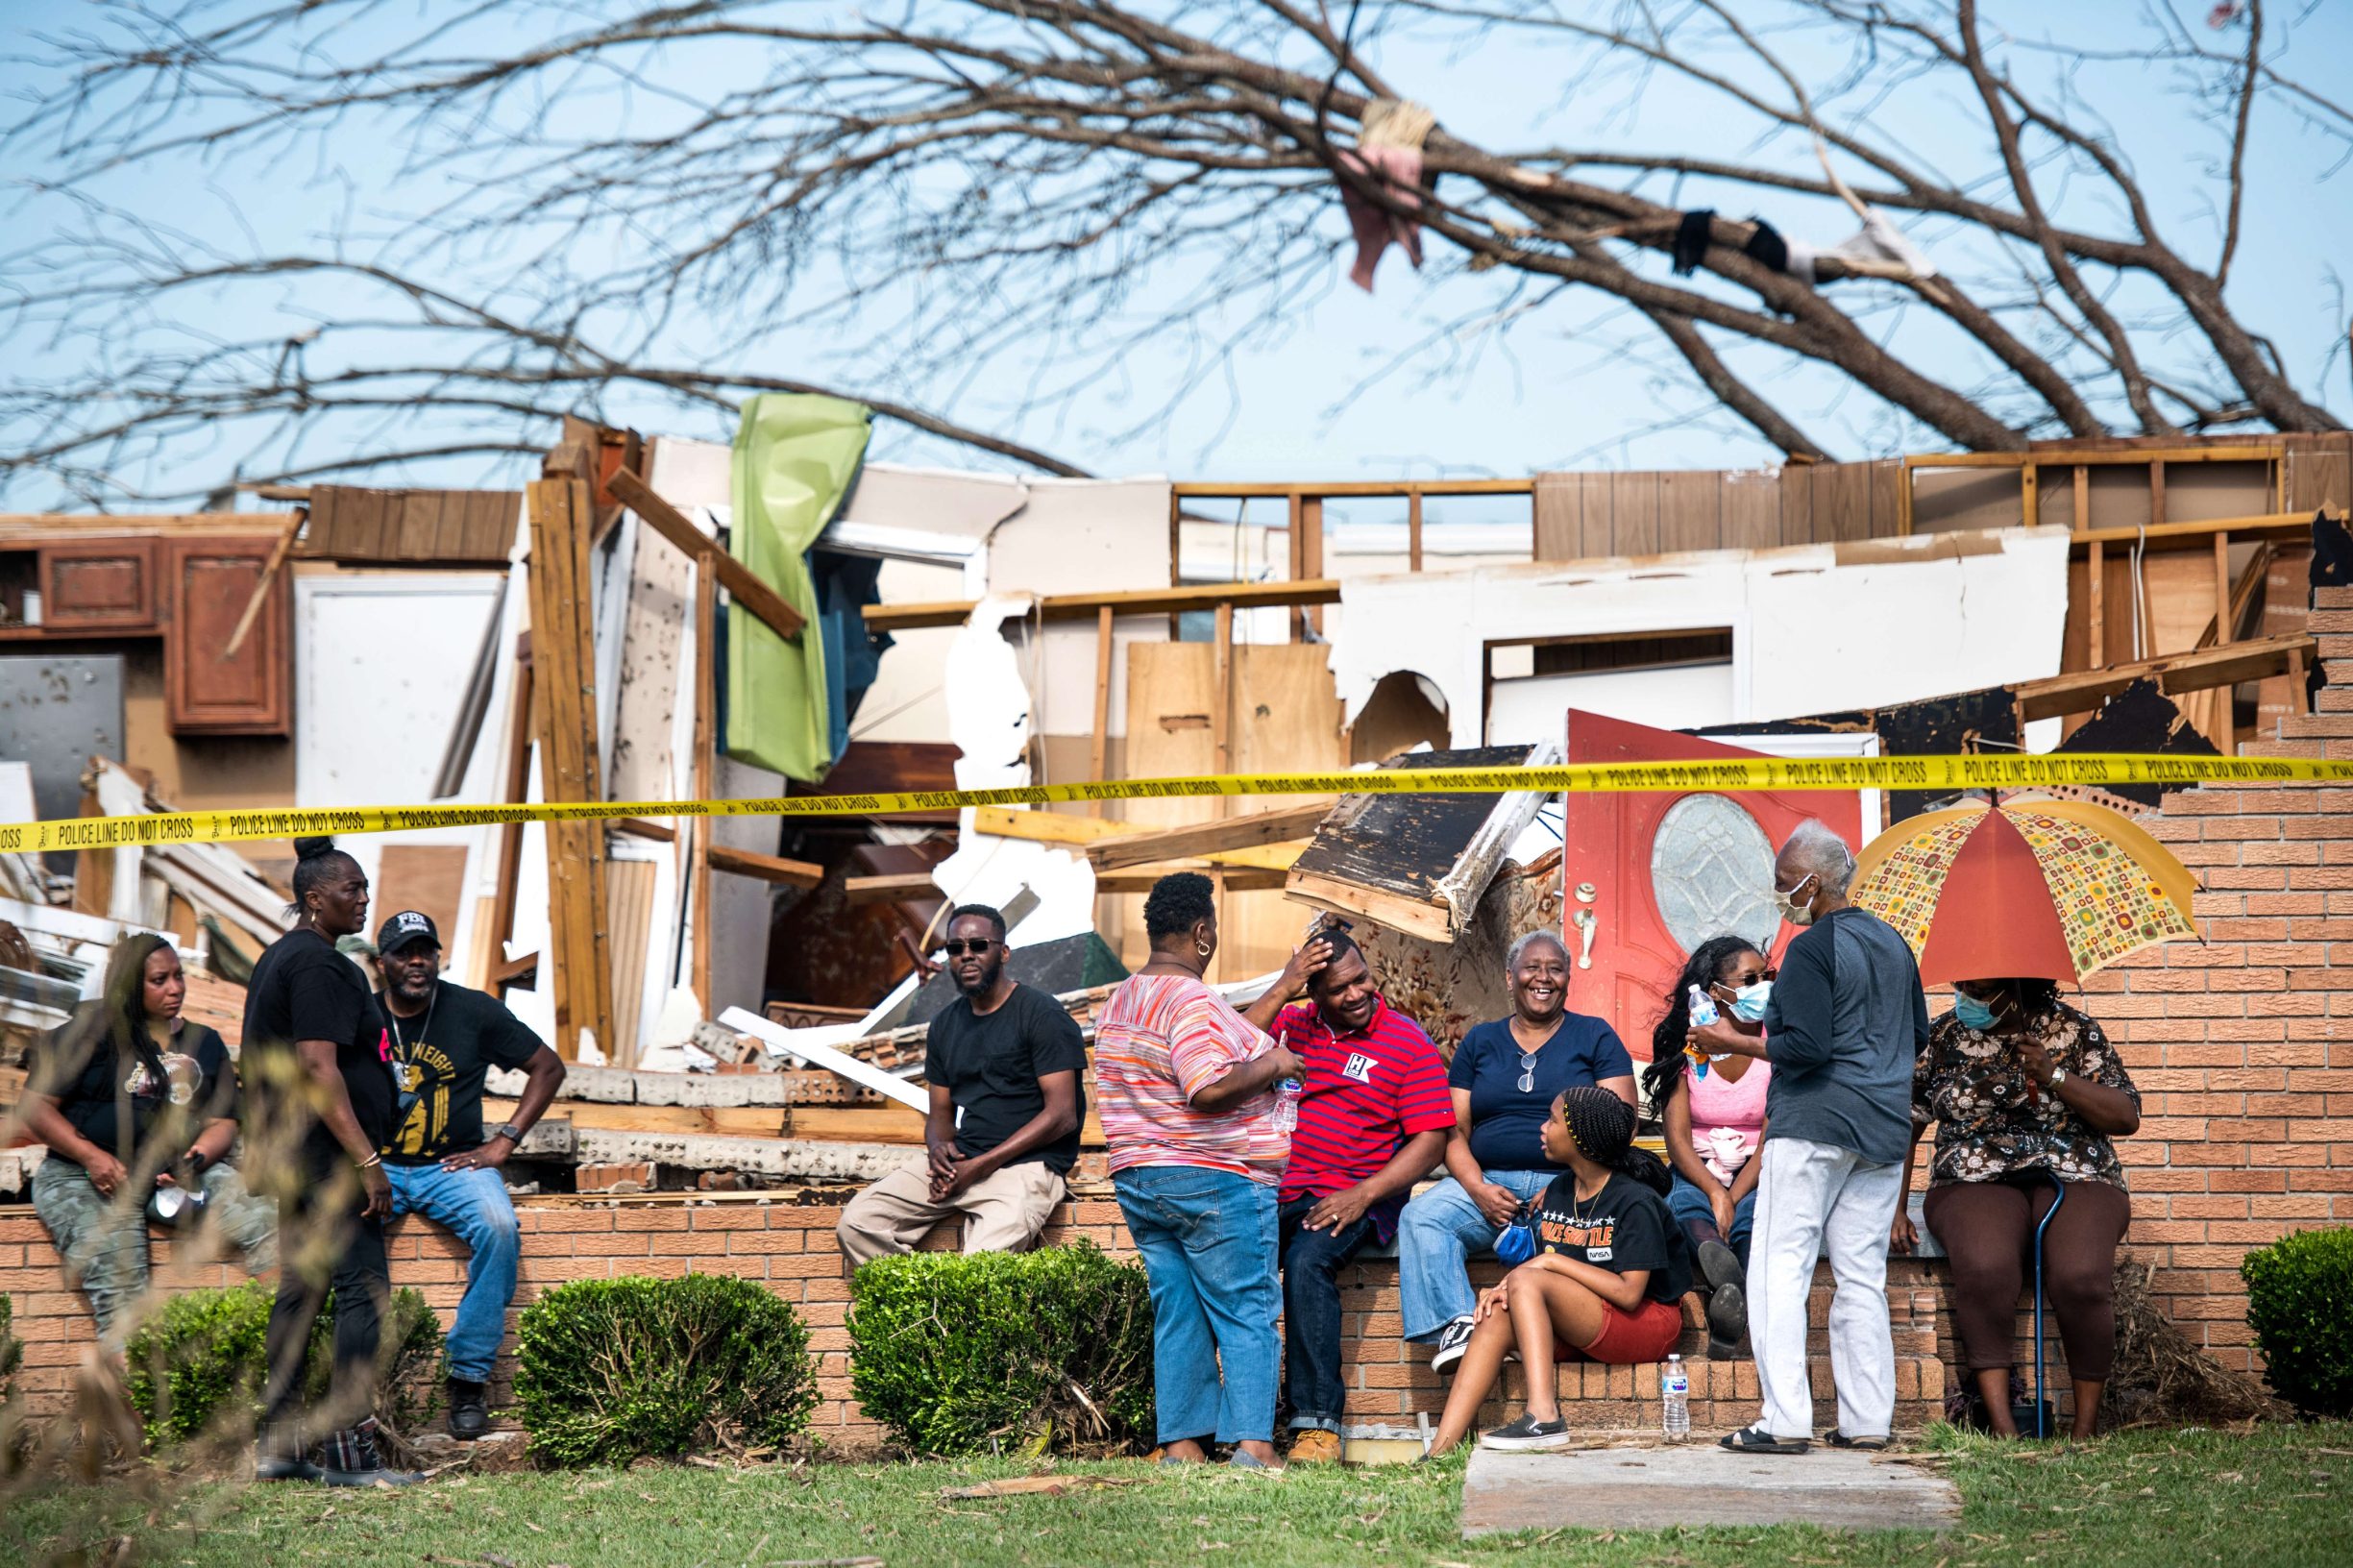 NIXVILLE, SC - APRIL 13: Family, friends and neighbors sit in front of a destroyed home on April 13, 2020 in Nixville, South Carolina. A string of storms across the southern United States that began Easter Sunday and continued into today produced multiple tornados resulting in more than 30 deaths and dozens more injuries.   Sean Rayford/Getty Images/AFP
== FOR NEWSPAPERS, INTERNET, TELCOS & TELEVISION USE ONLY ==